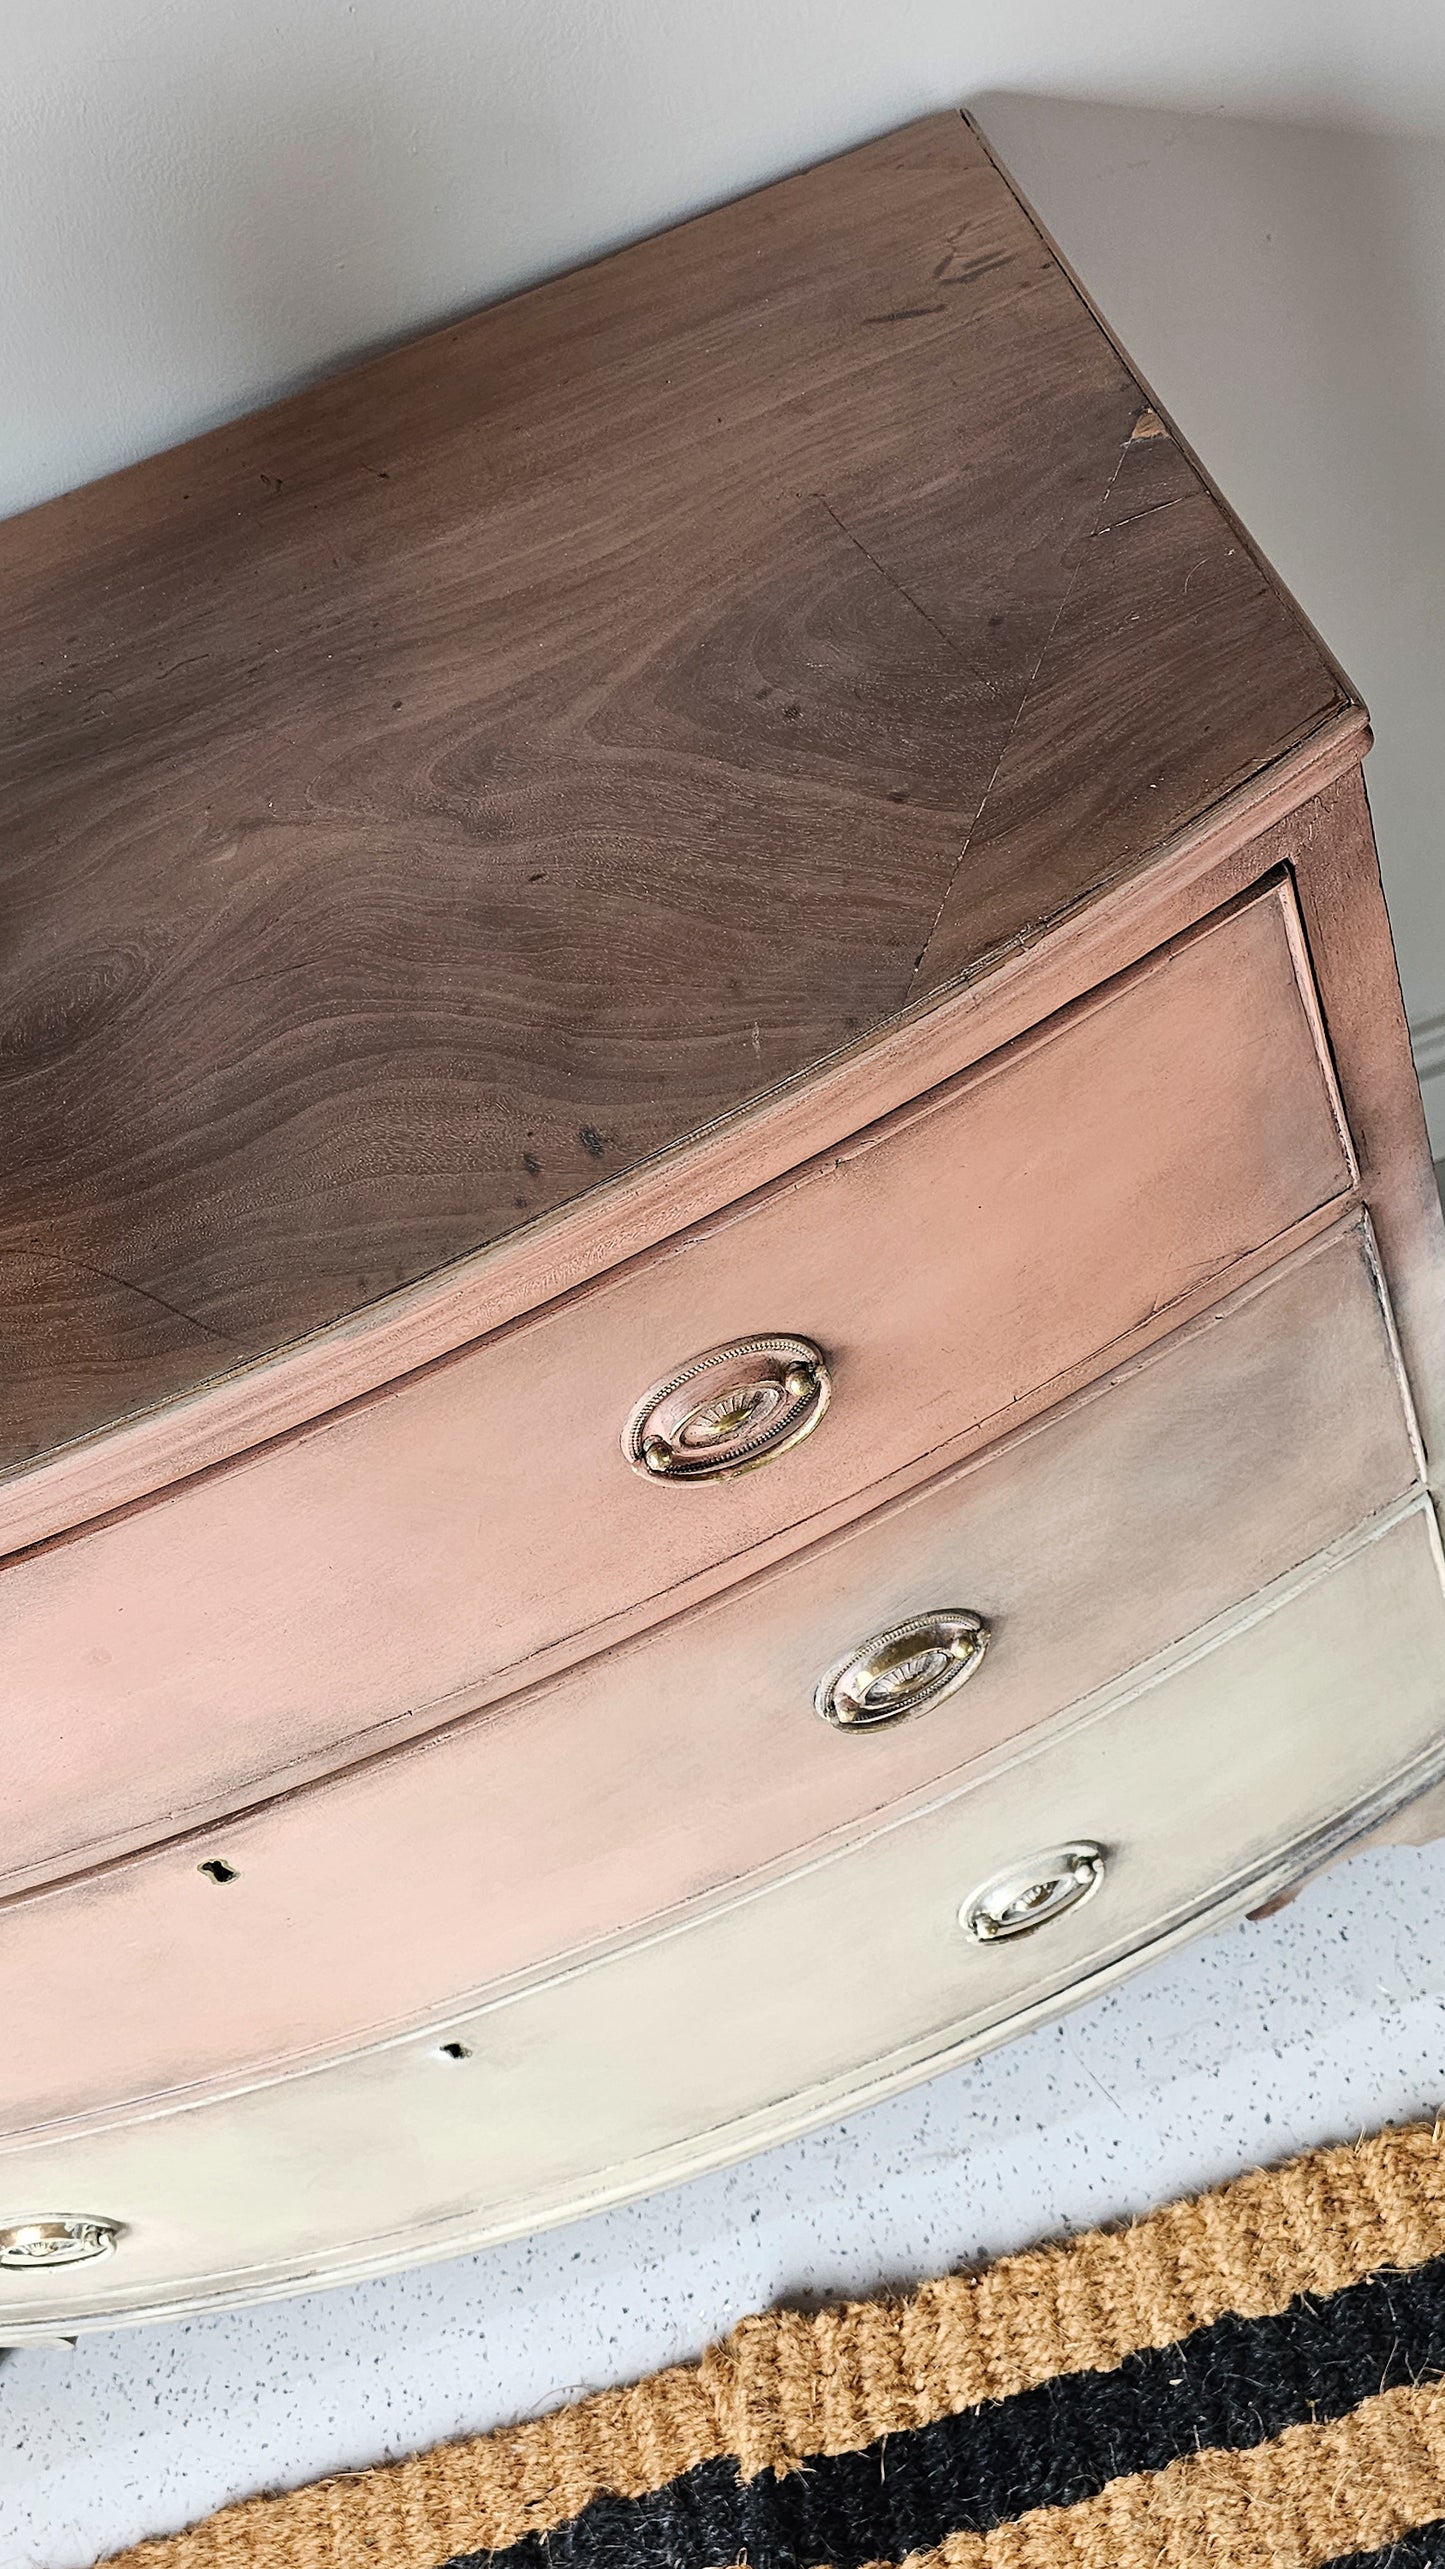 The Coral Ombre Chest of Drawers